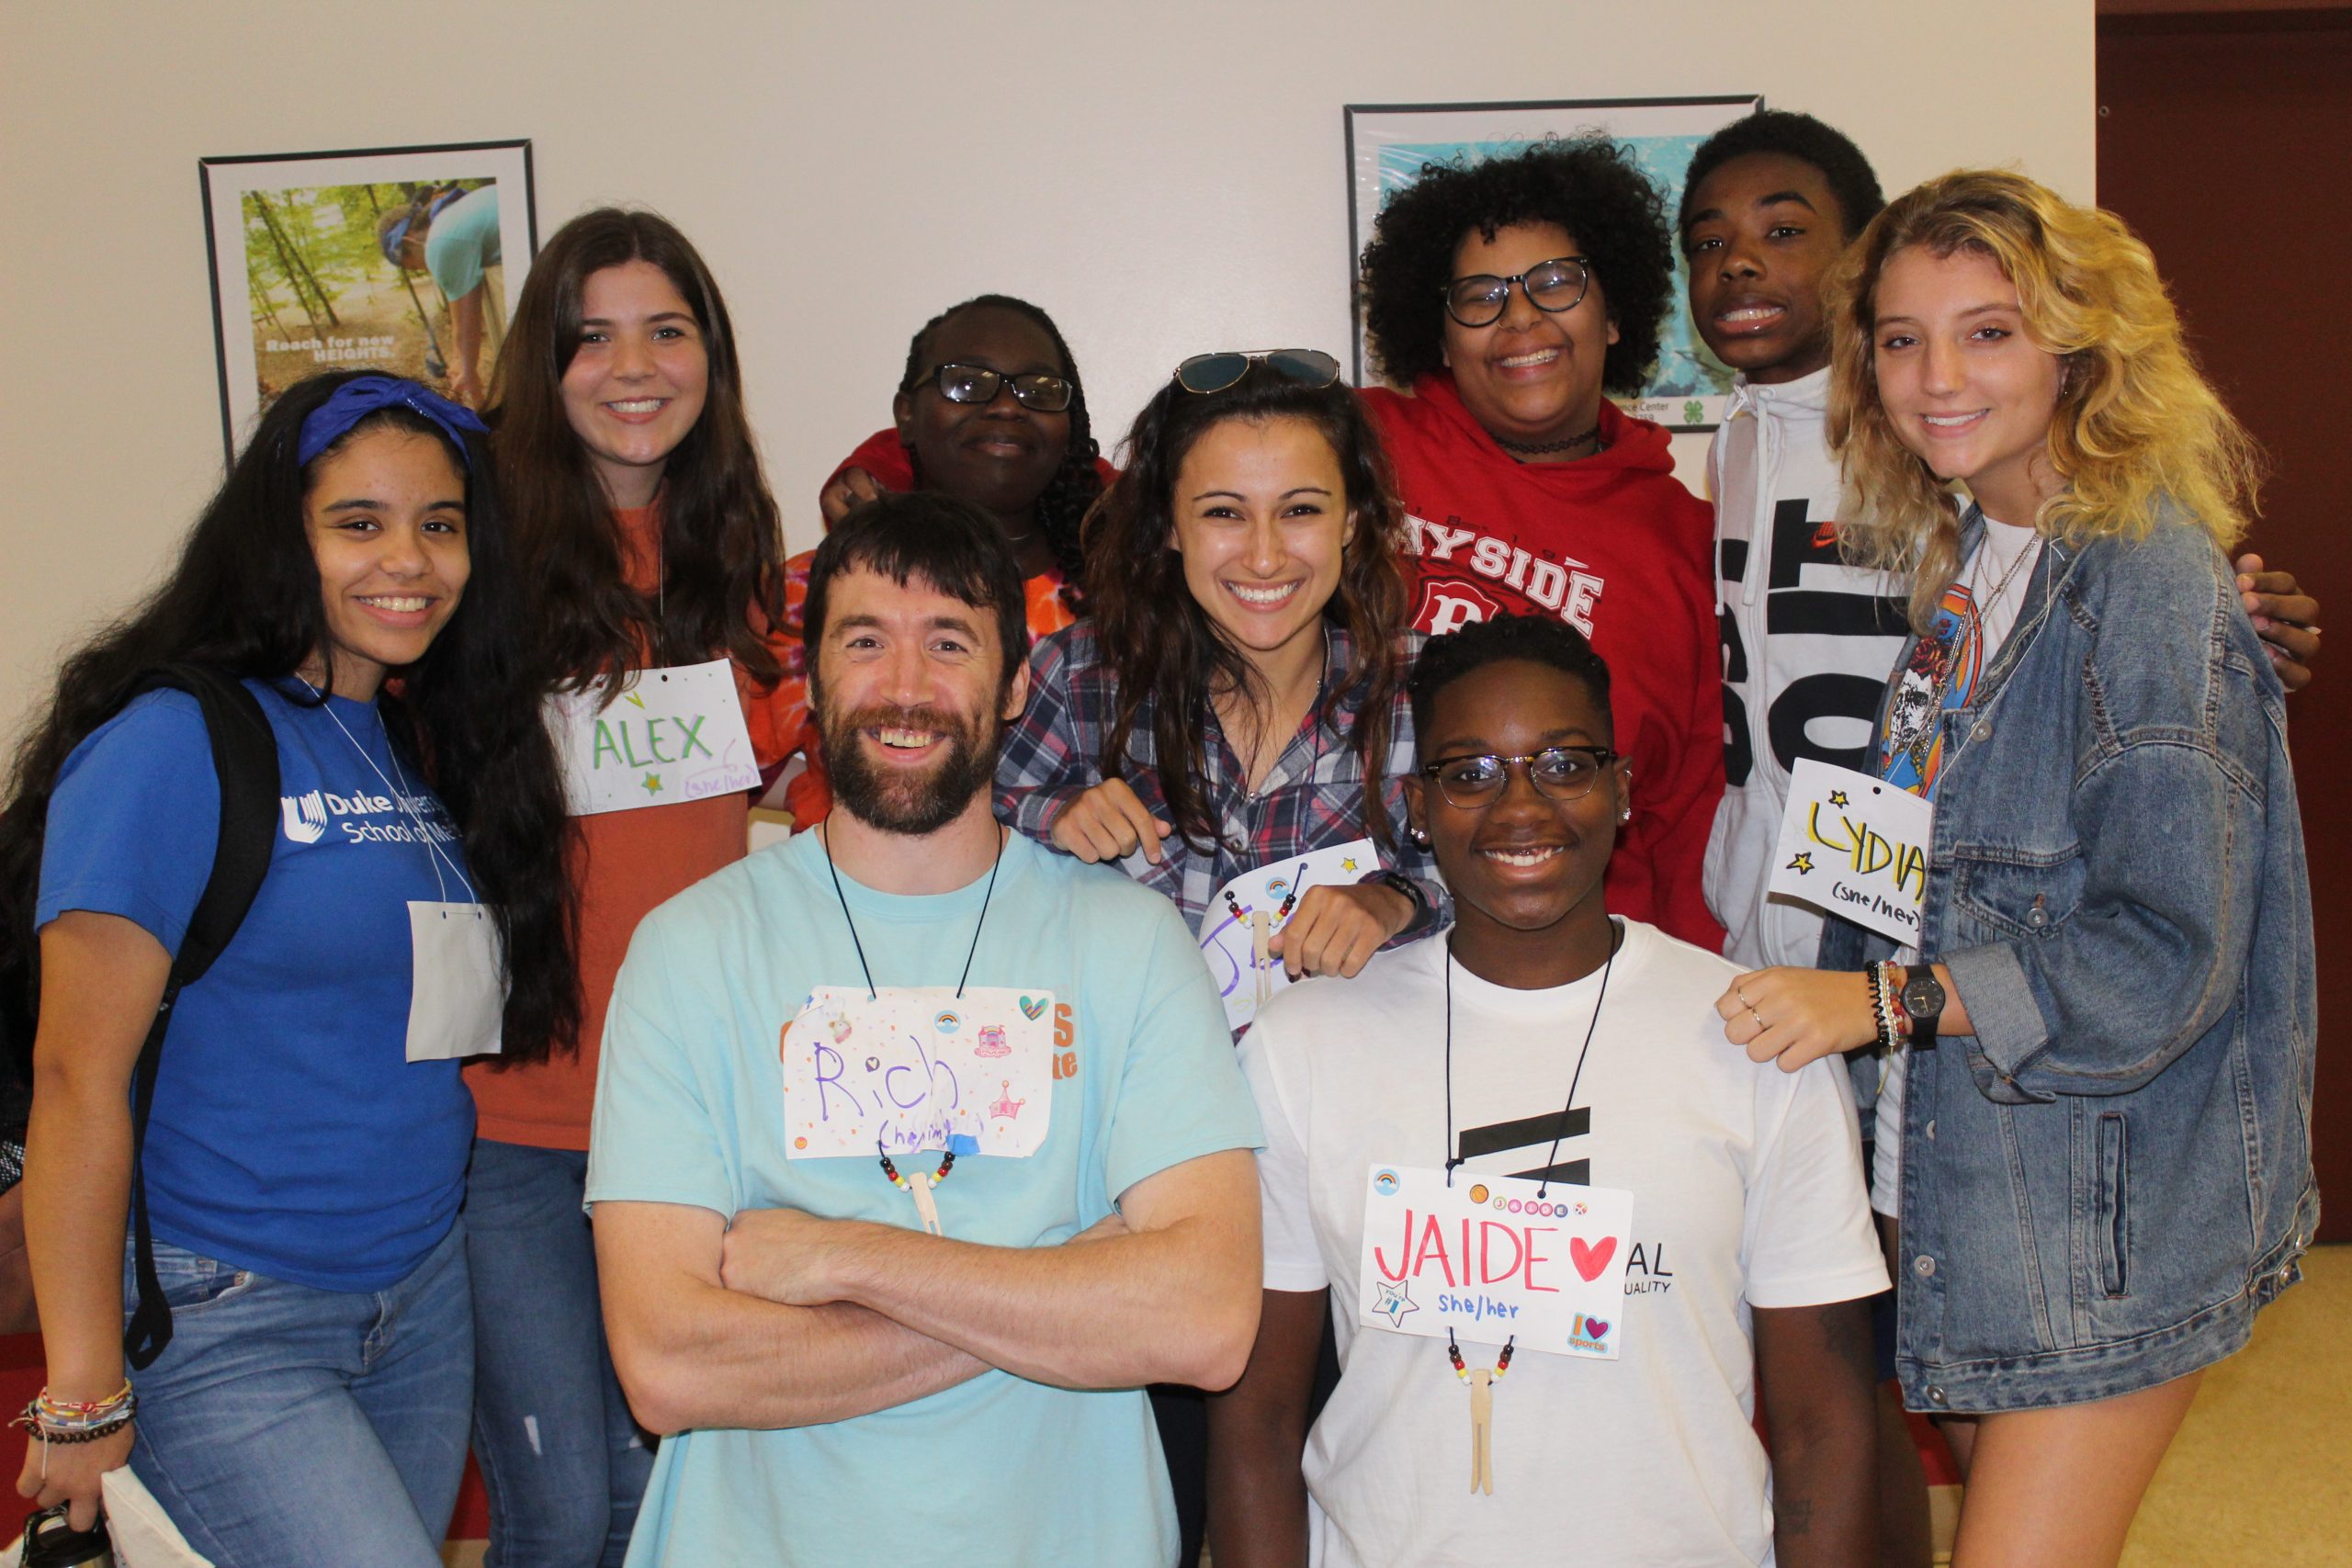 A diverse group of nine young people are standing together and smiling. They each have a paper nametag on that have been decorated and include the person’s name and pronouns.